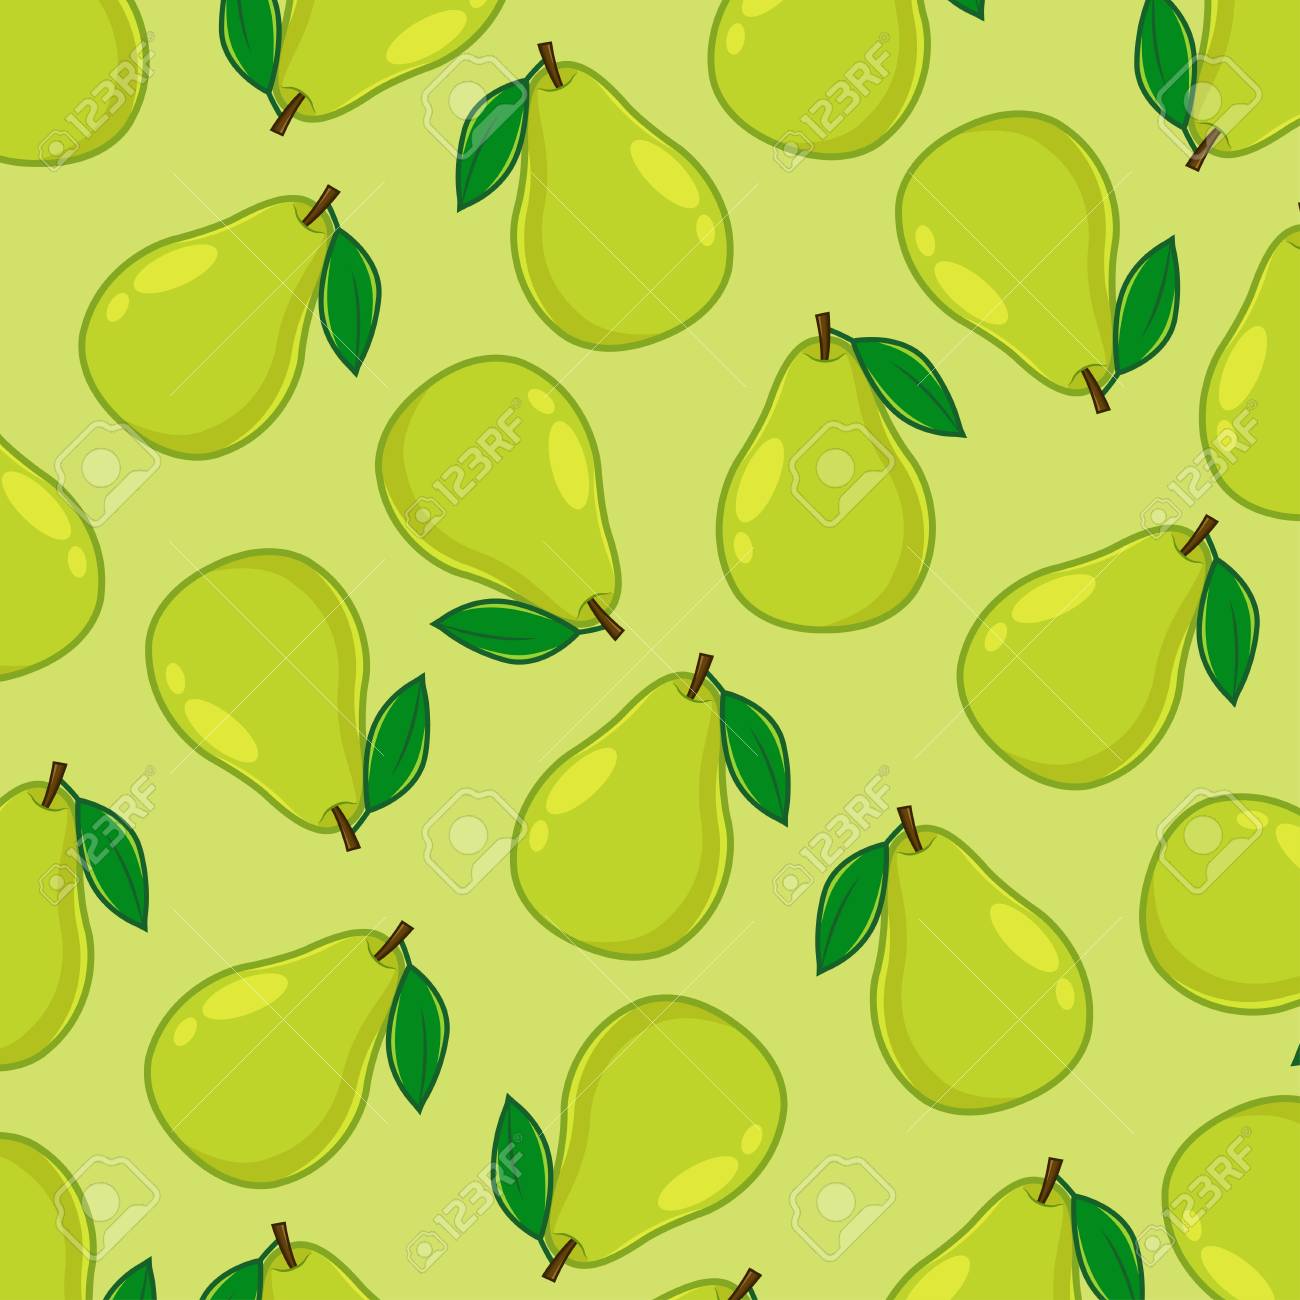 Pears pattern background Royalty Free Vector Image